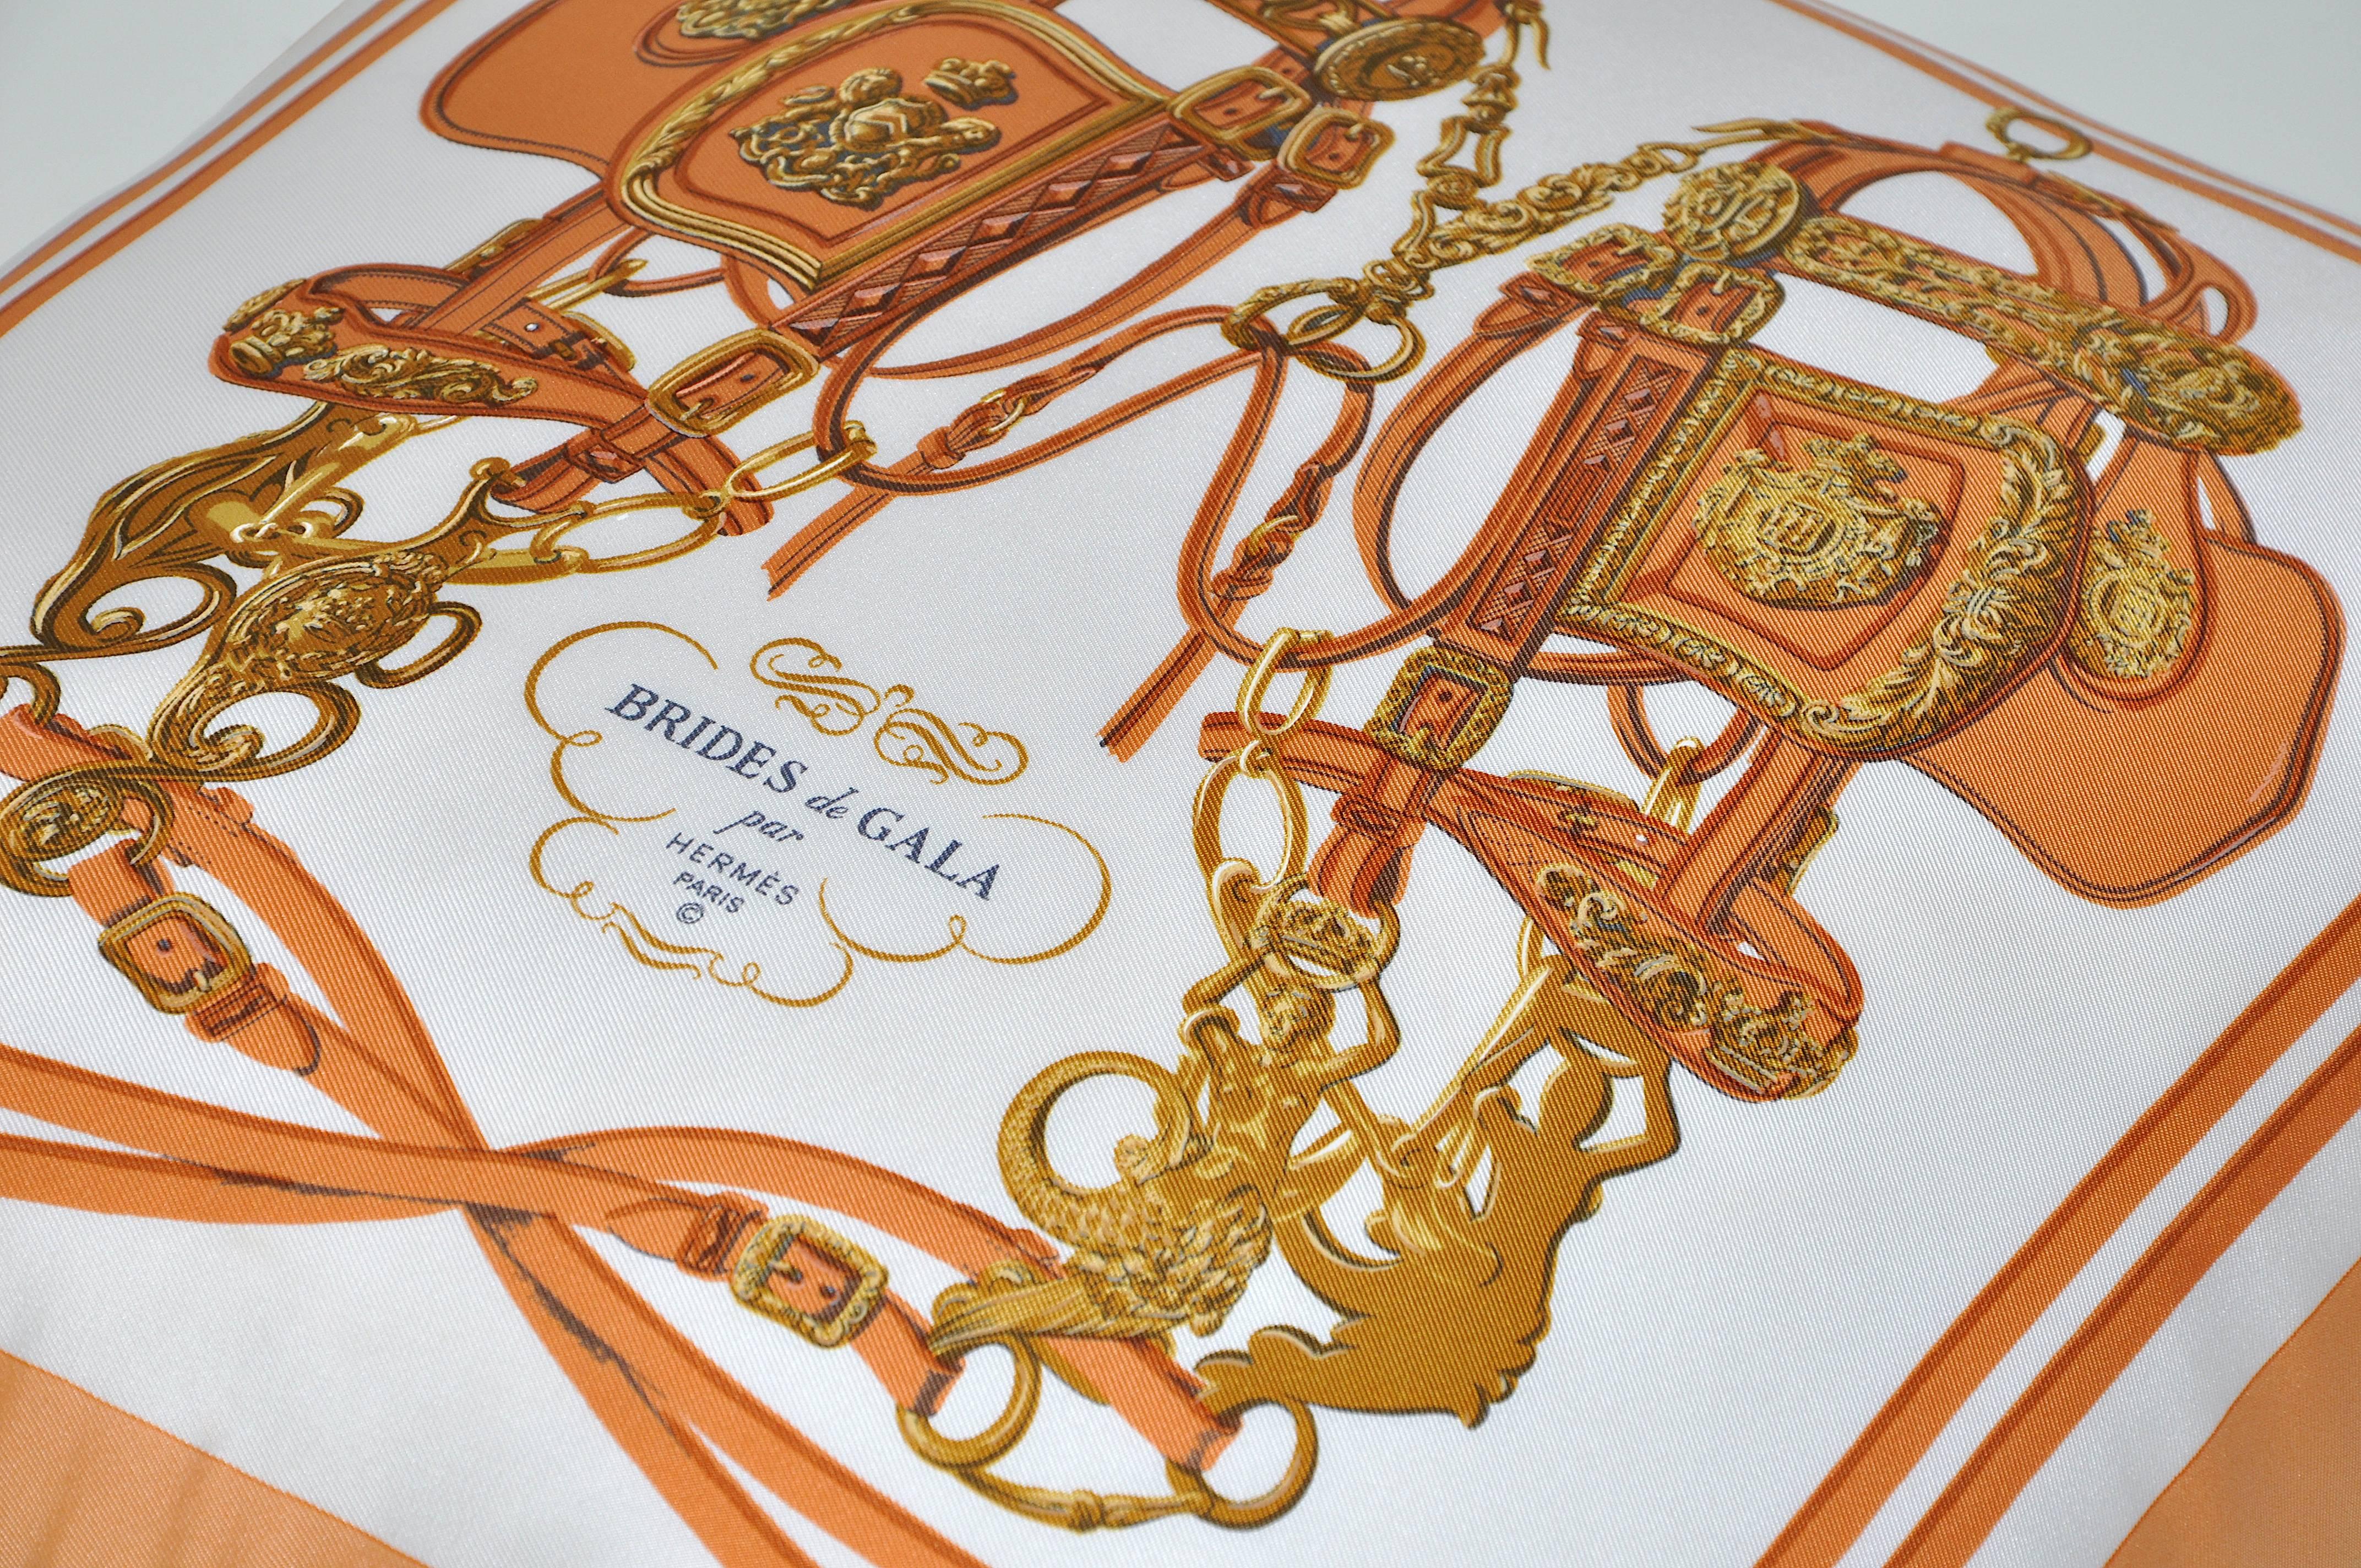 The ‘crème de la crème’ of scarves, this beauty is a one-of-a-kind custom-made cushion (pillow) created from an exquisite vintage silk Hermes fashion scarf in their striking equestrian design ‘Brides de Gala’ designed by Hugo Grygkar in 1957.

The